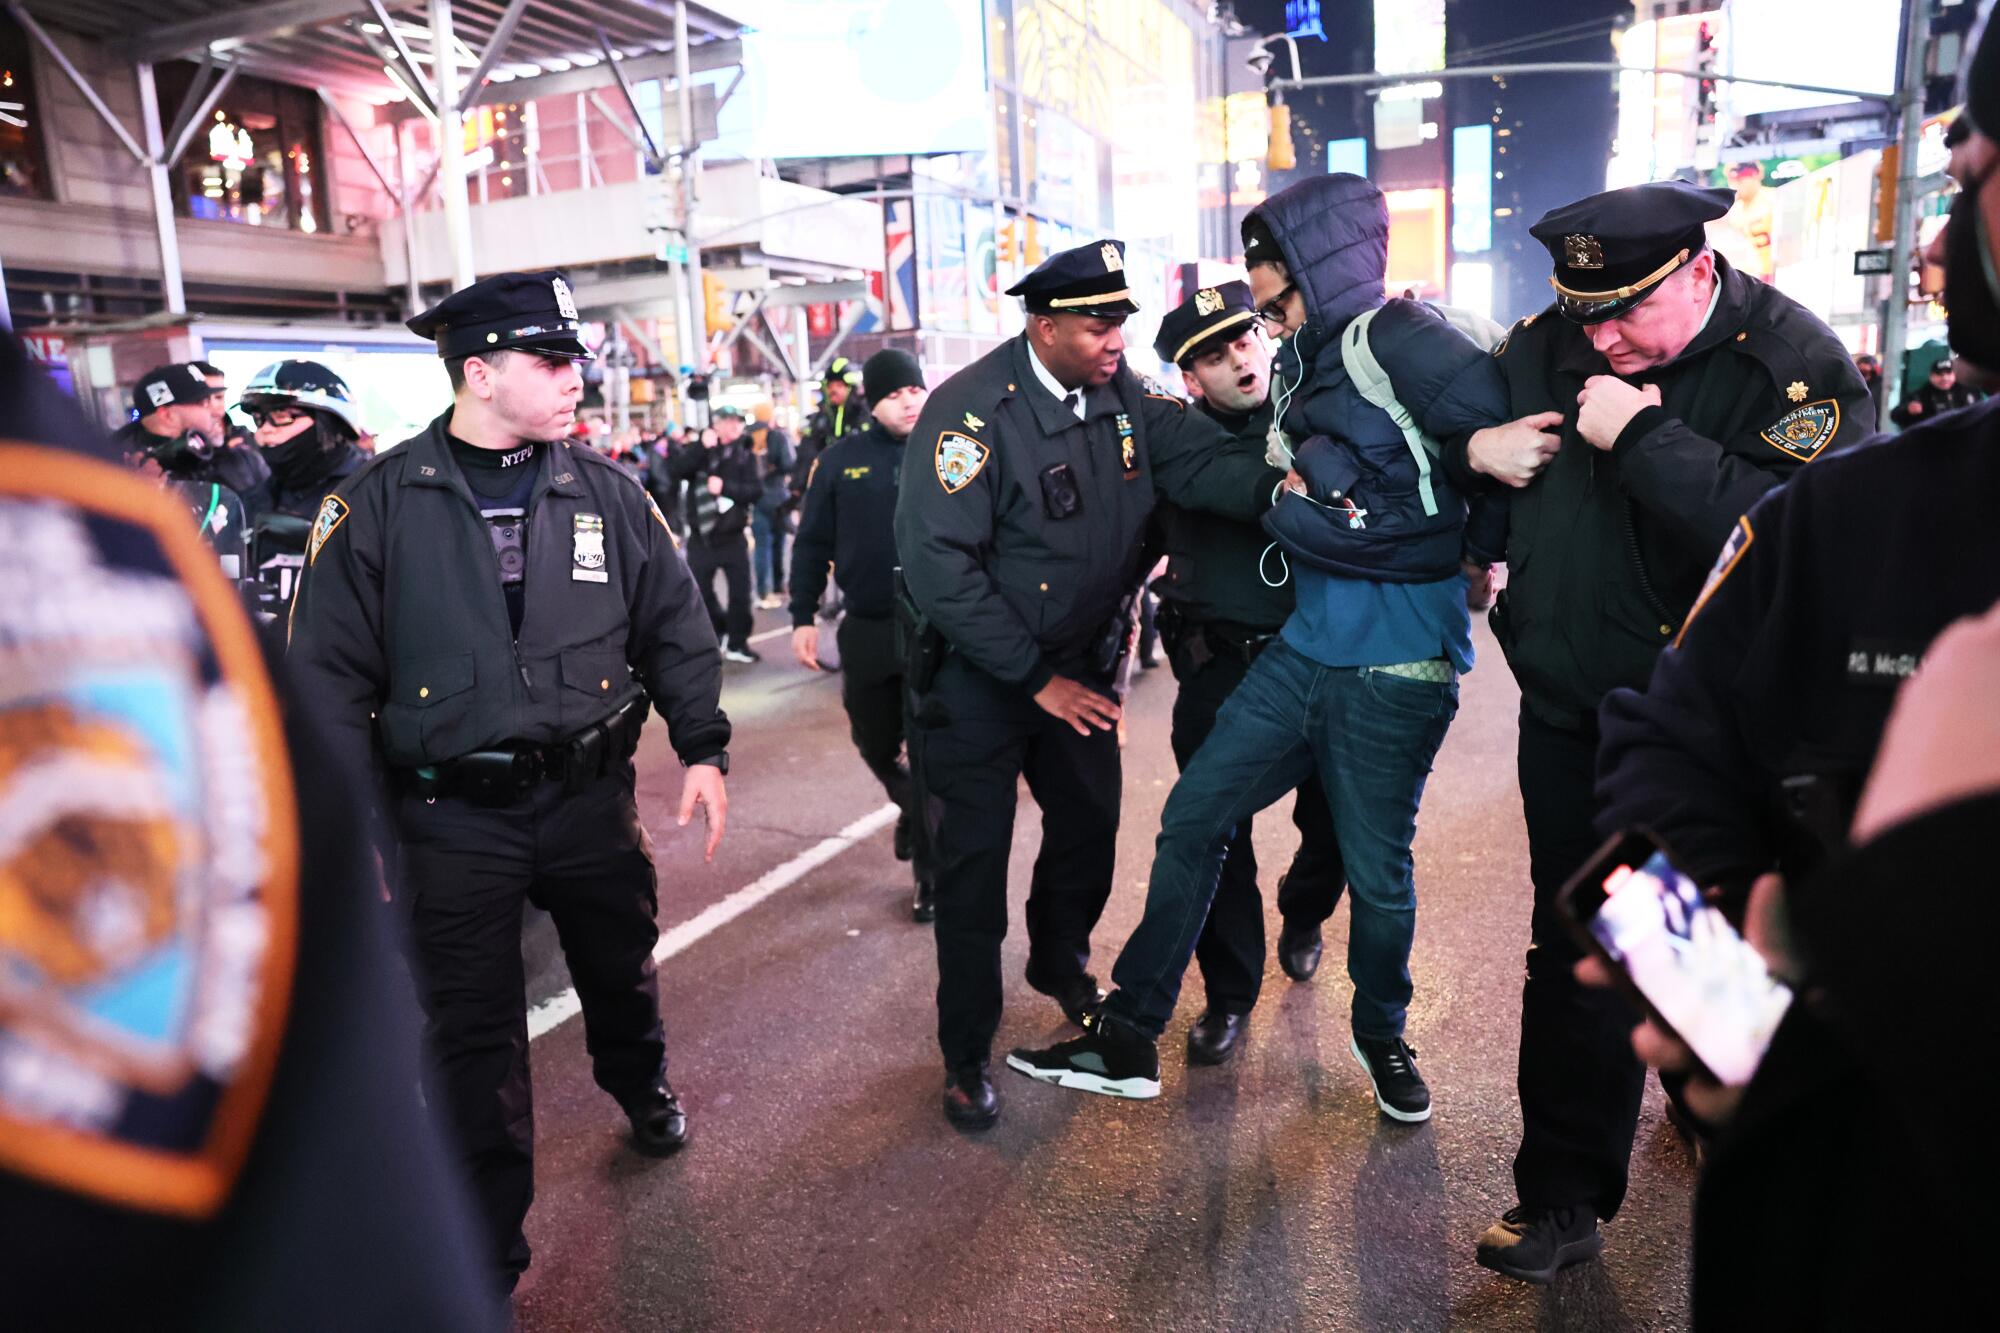 Three police officers restrain a young man on a street in New York.